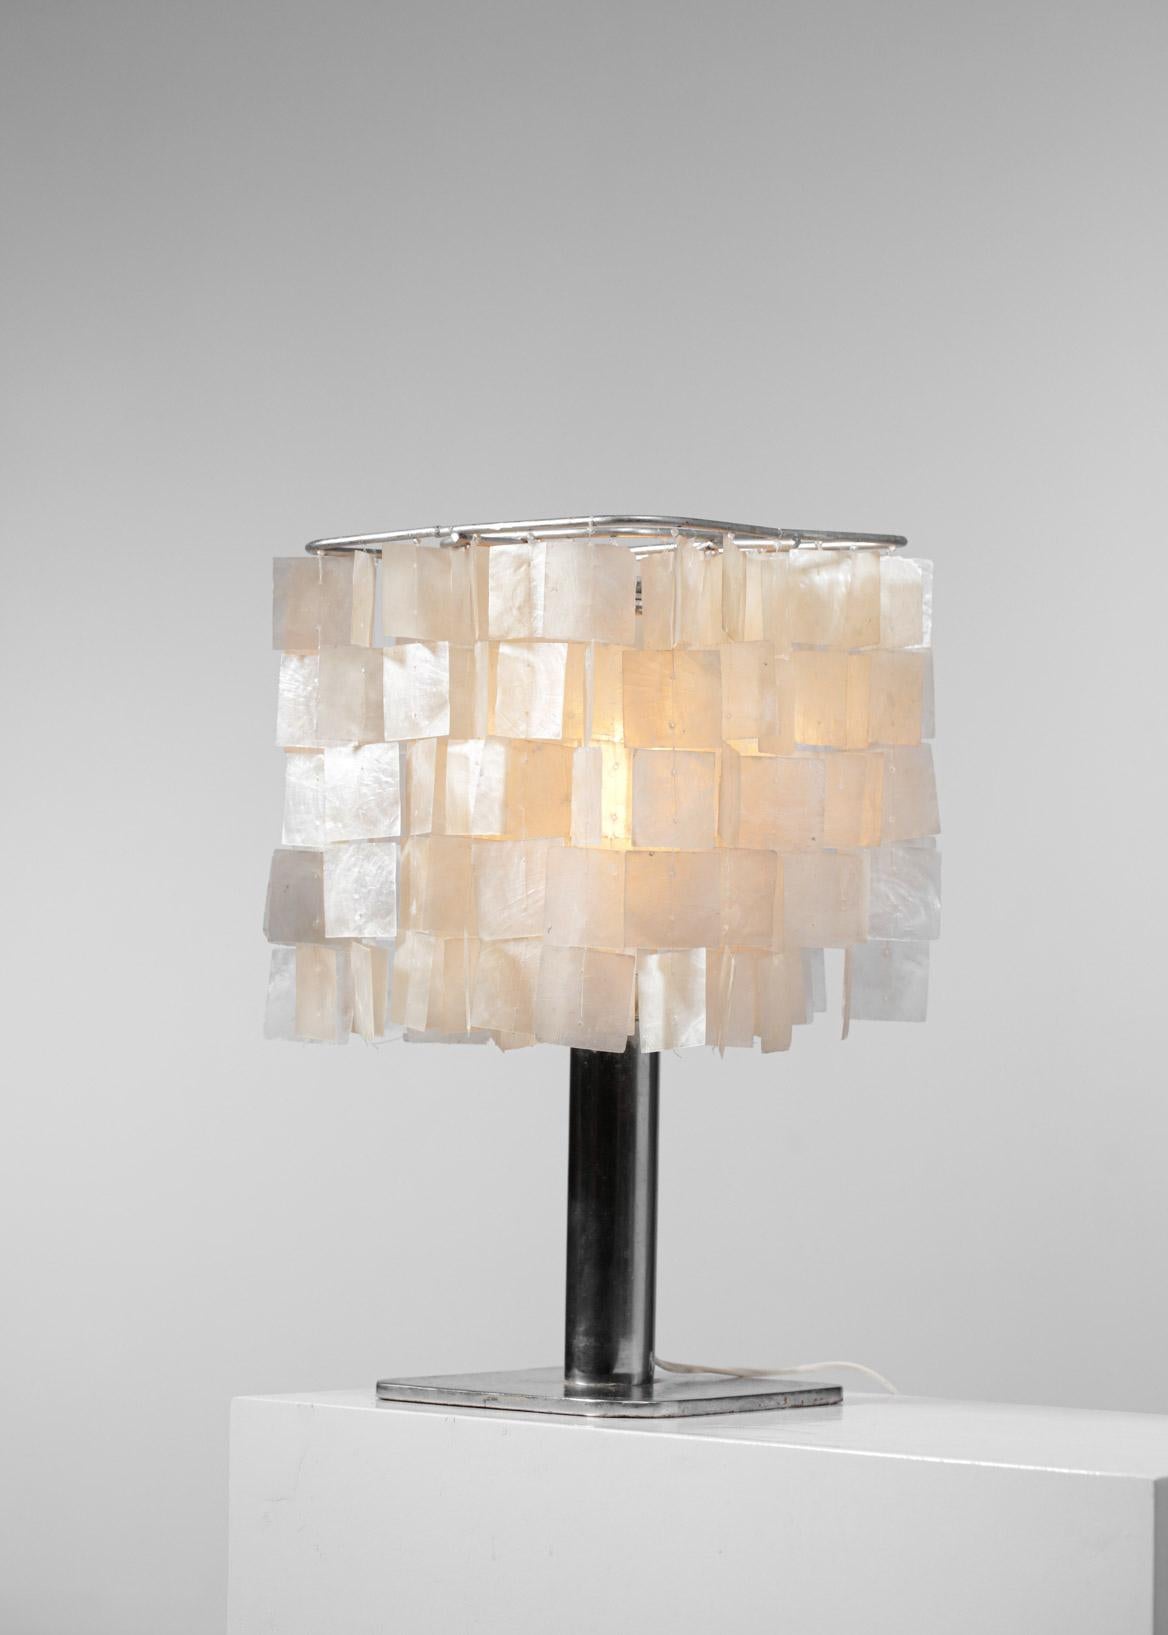 Unique Handmade Table Lamp in Mother of Pearl 70s Style Verner Panton G220 For Sale 2